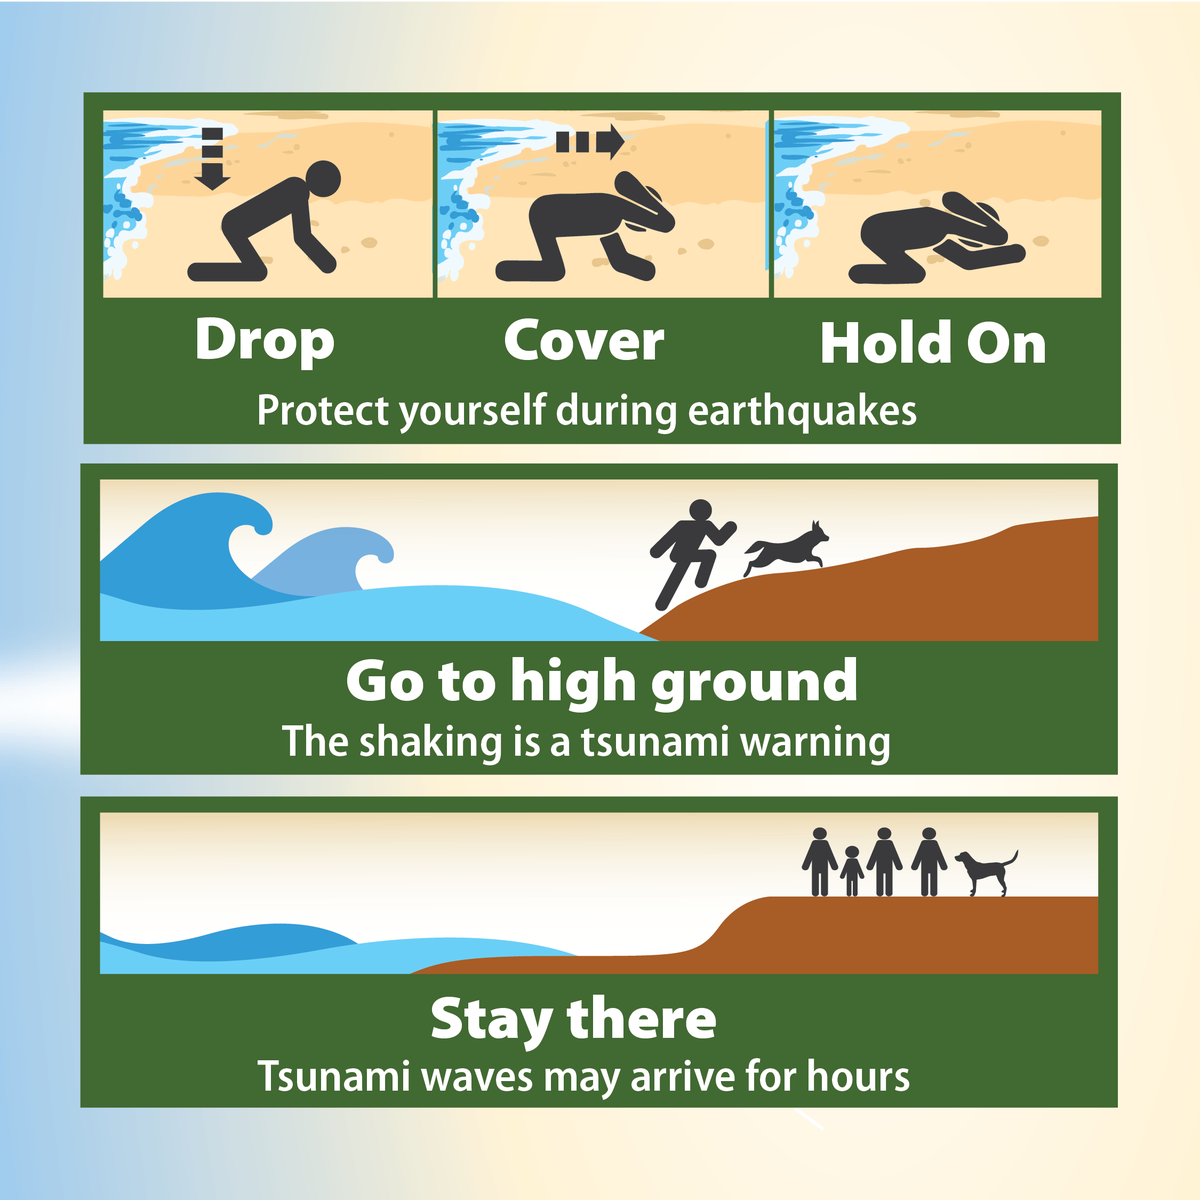 Coastal areas of BC are most at risk of tsunamis. If you’re near the coast & feel shaking: Drop to the ground ✔️ Cover your head with your arms & bend over ✔️ Hold On & count to 60 before getting up then IMMEDIATELY go to high ground & stay there ✔️ PreparedBC.ca/tsunamis